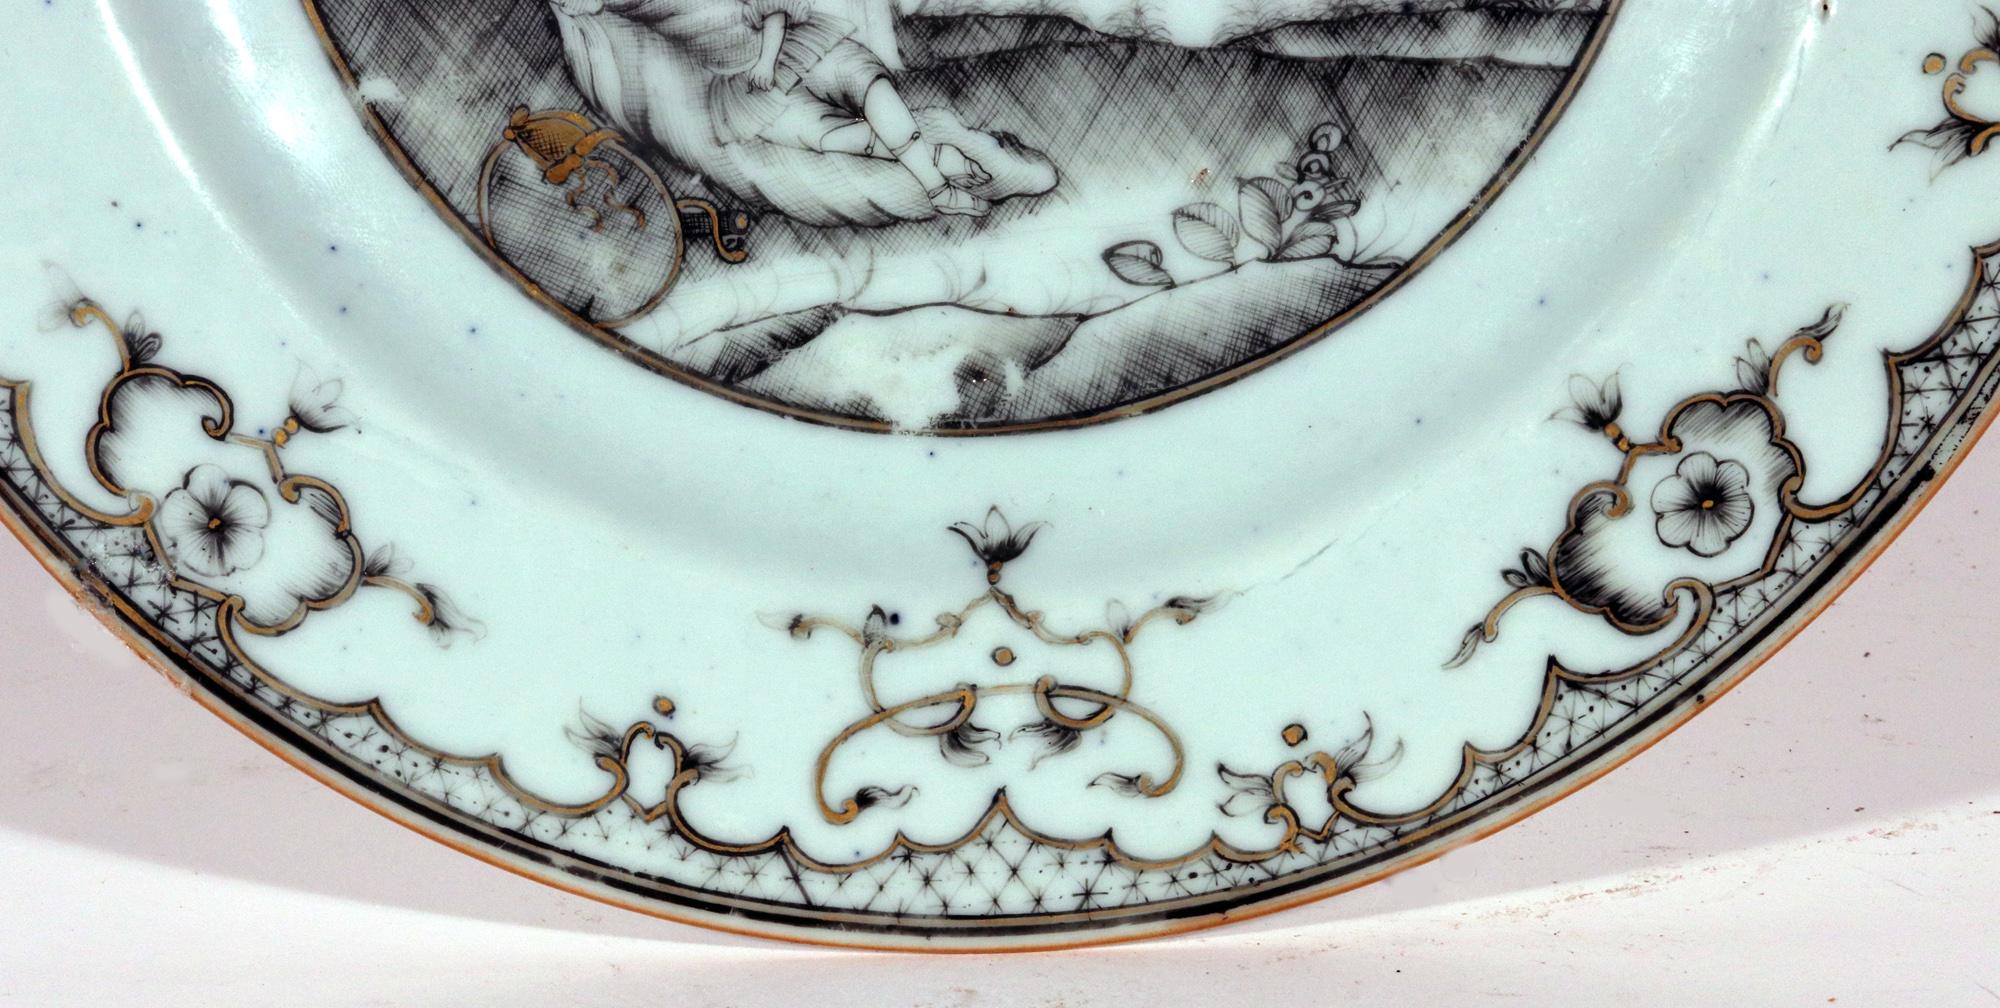 Chinese Export Porcelain En Grisaille Mythical Plate with Venus, Cupid @ Adonis In Good Condition For Sale In Downingtown, PA